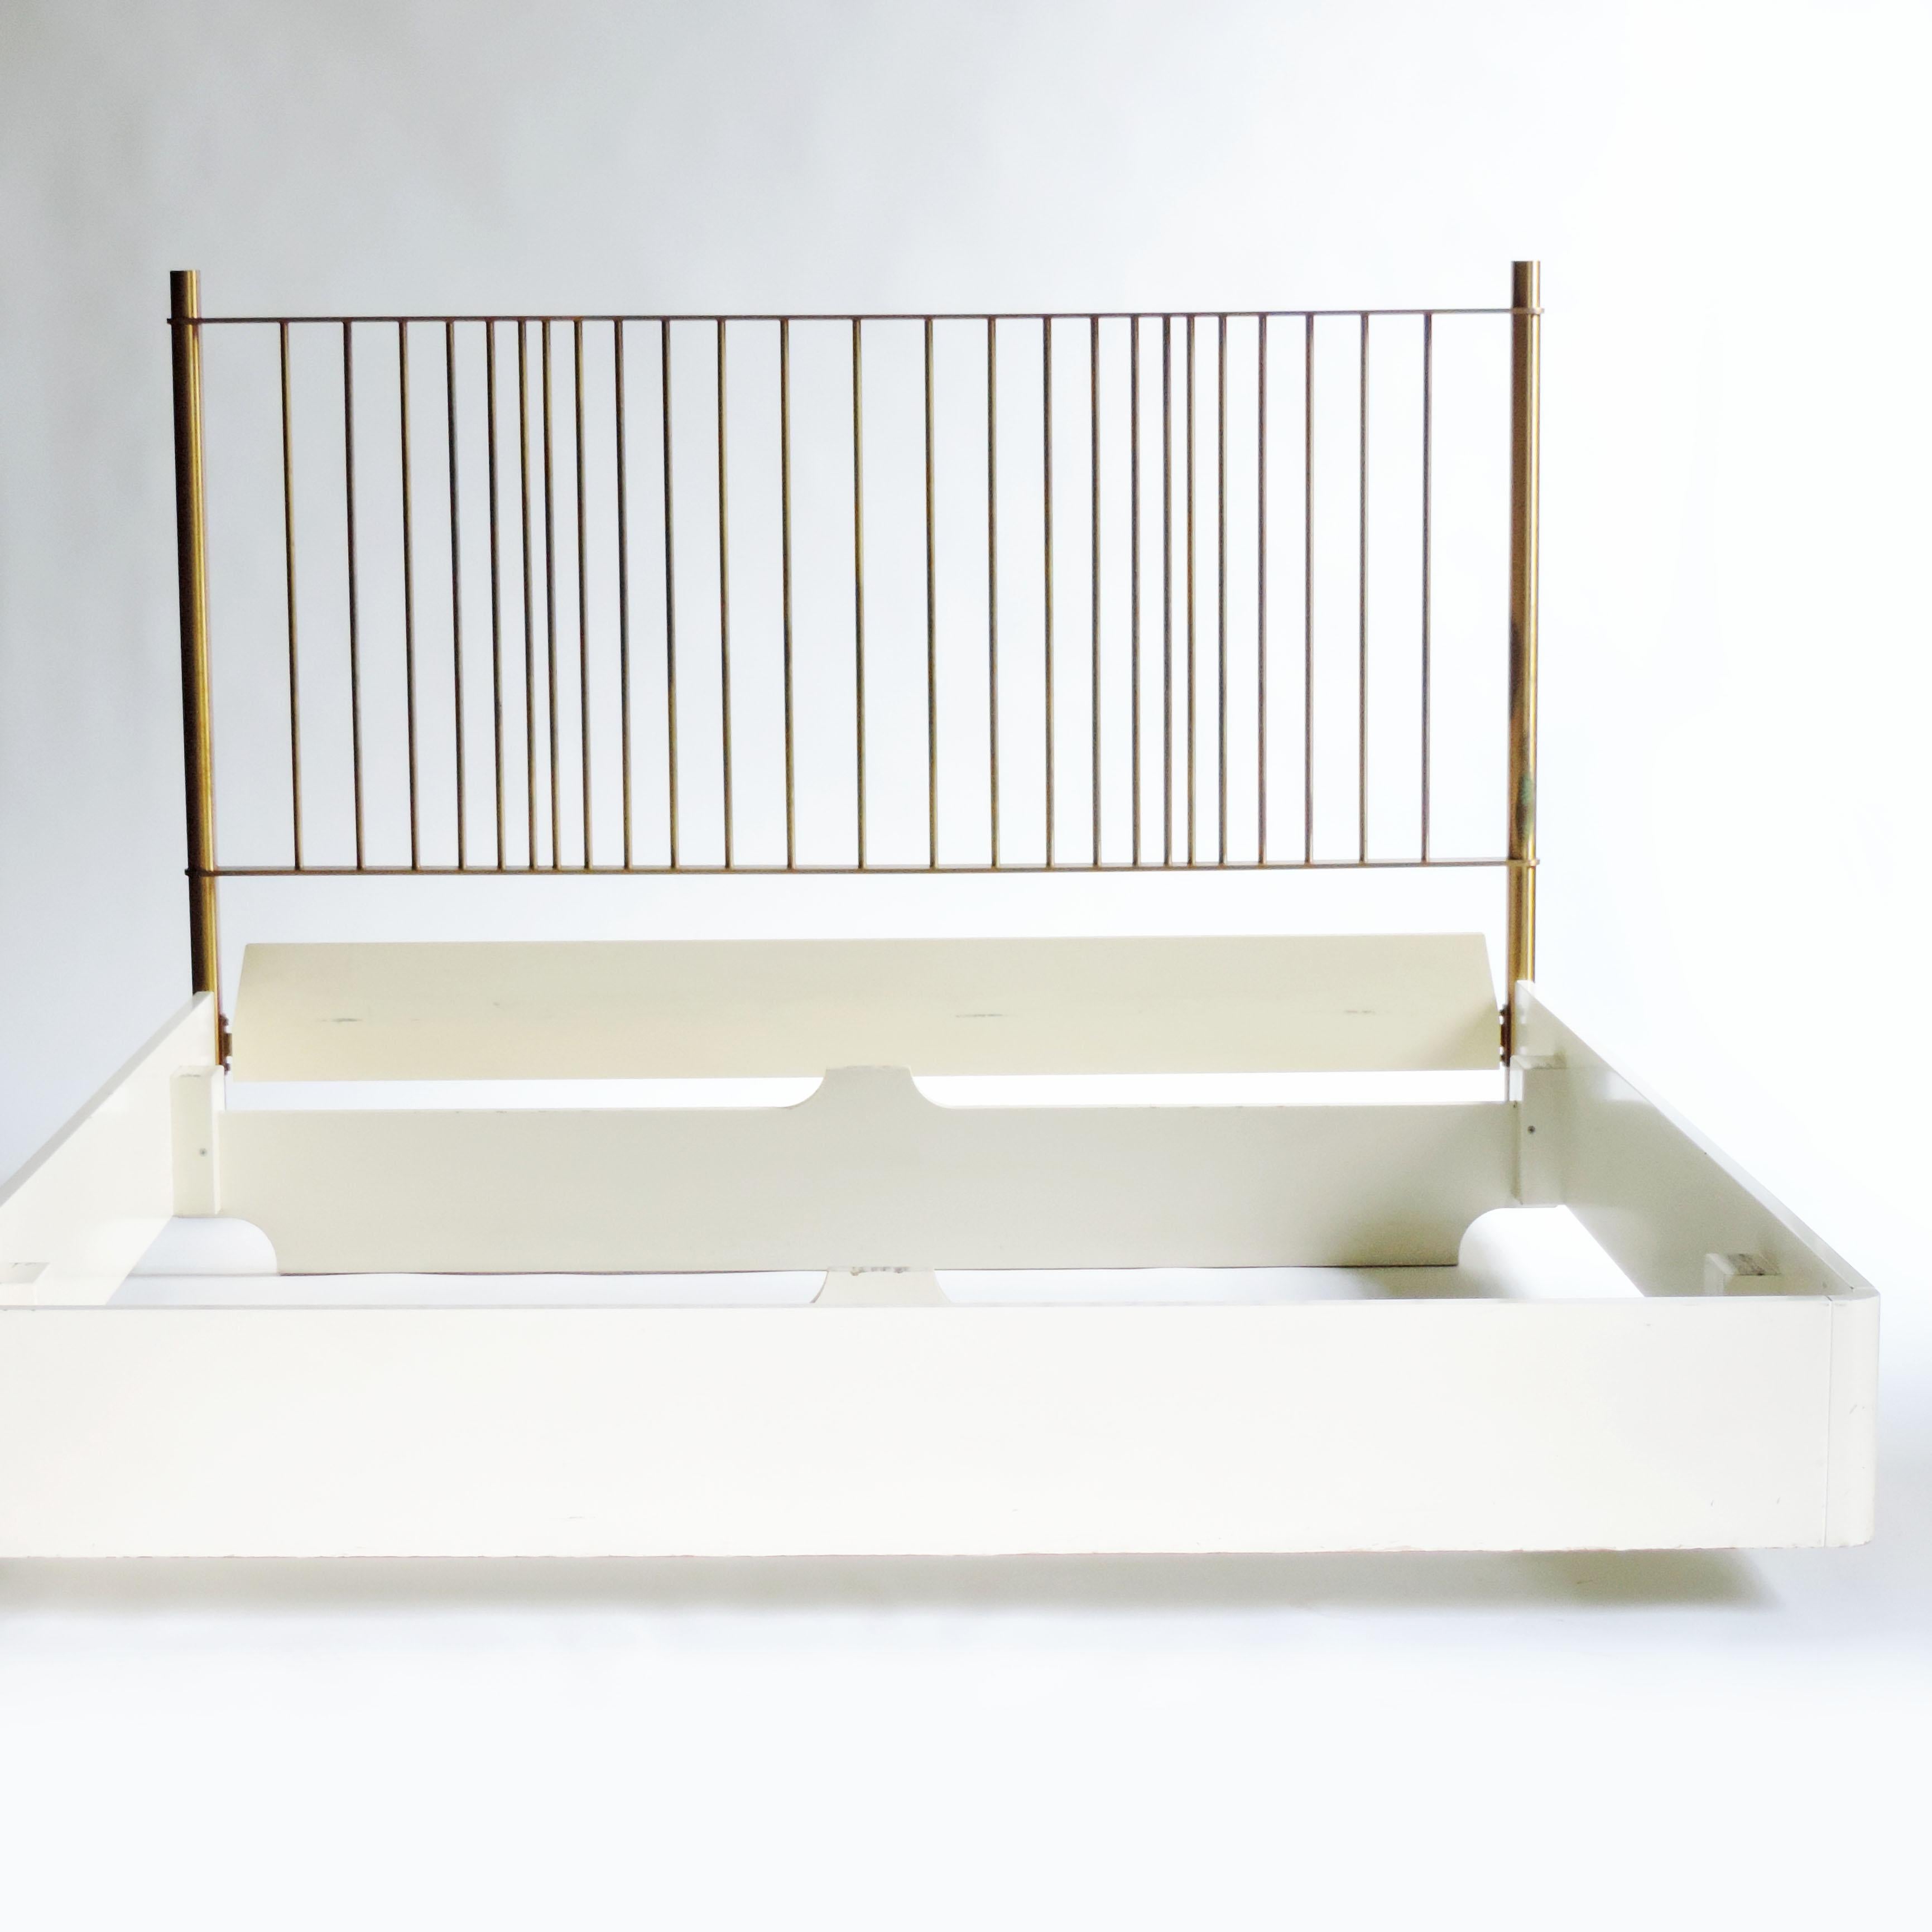 Italian Franco Albini & Franca Helg 'Mirage' Brass Double Bed for Frigerio, Italy, 1970s For Sale